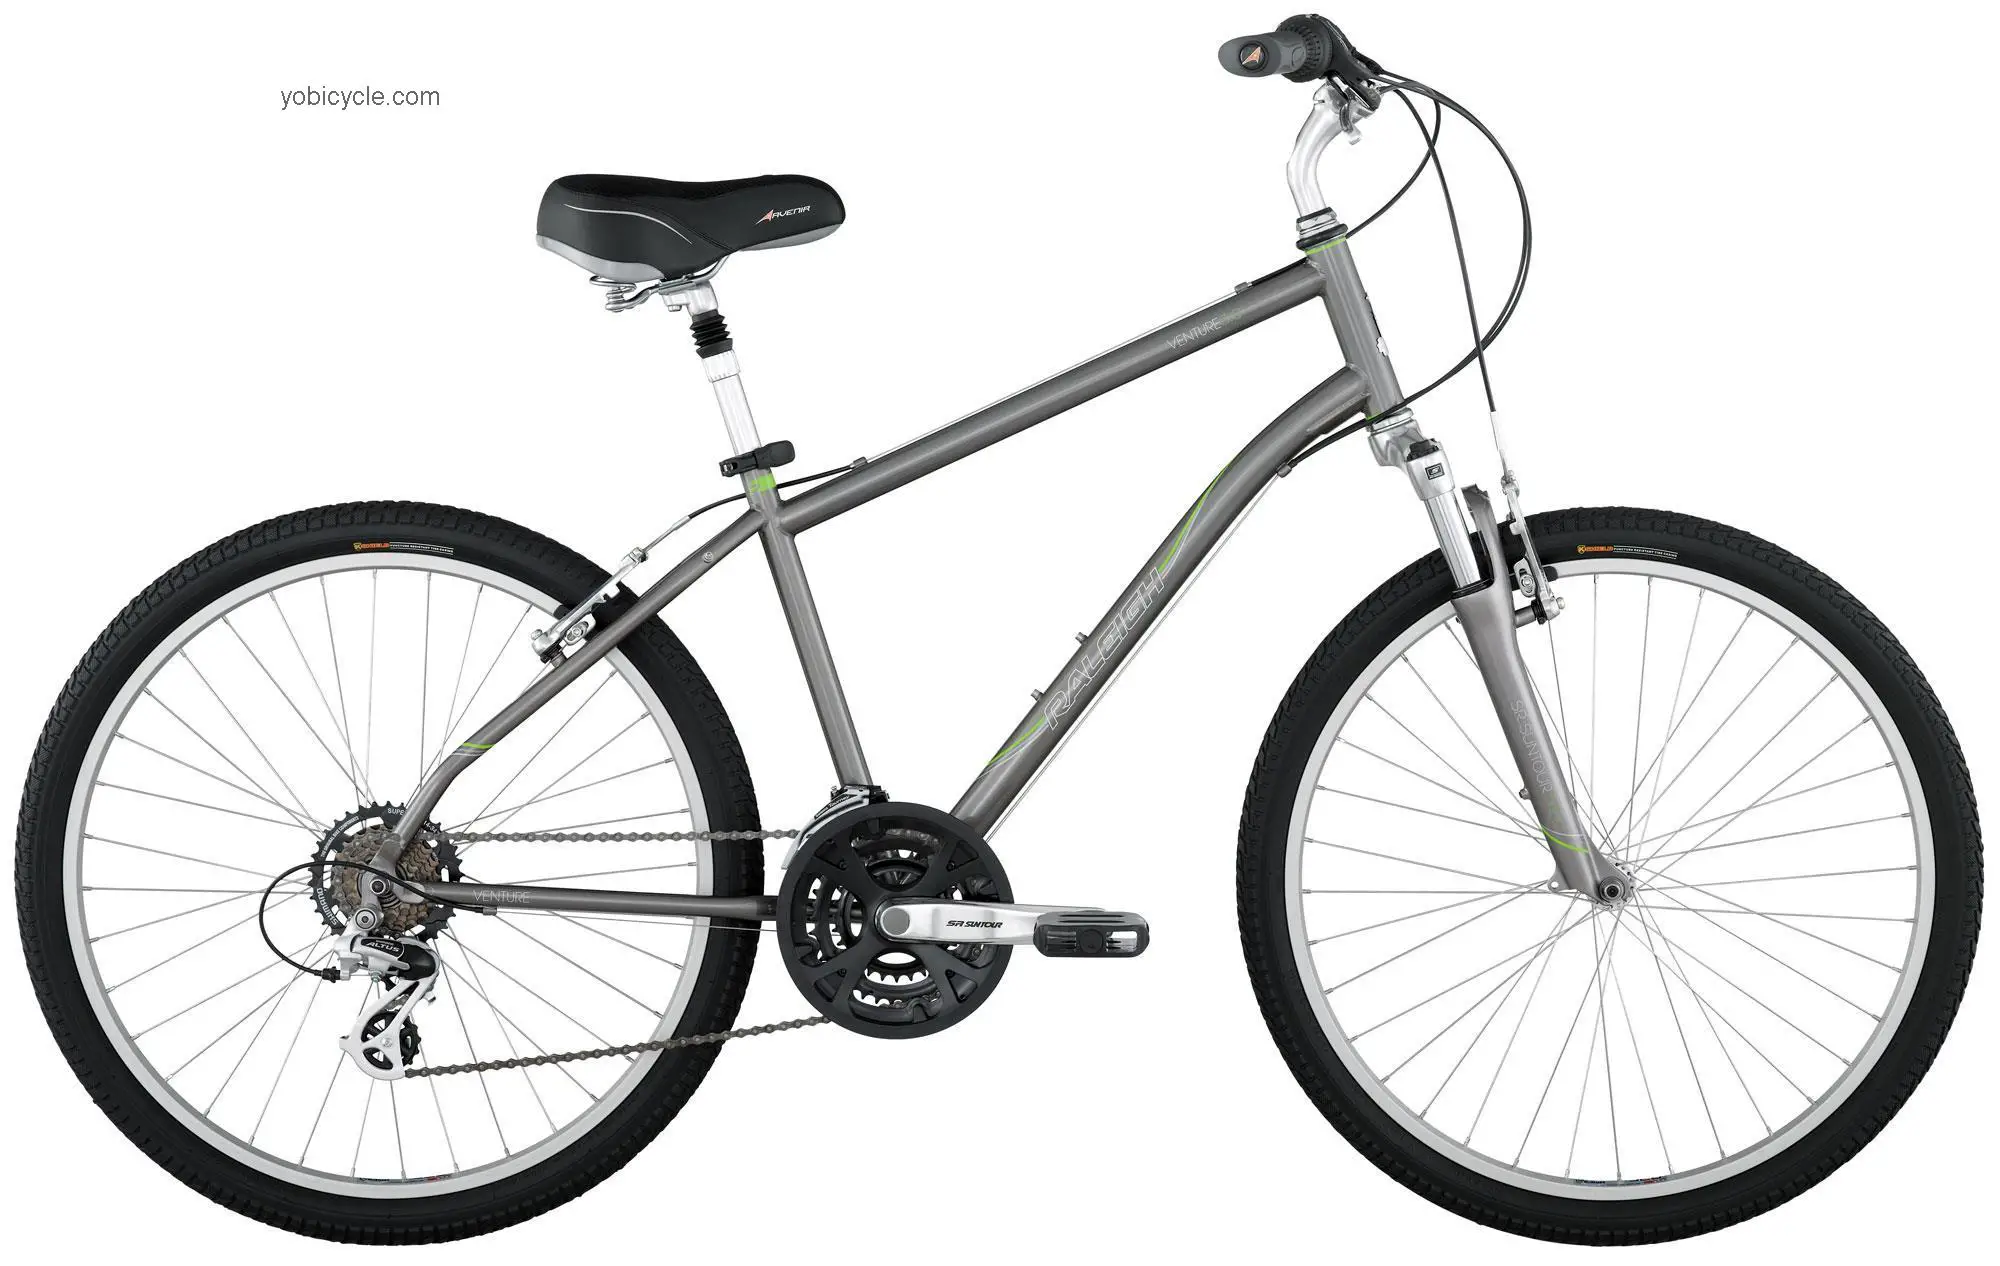 Raleigh Venture 3.0 competitors and comparison tool online specs and performance